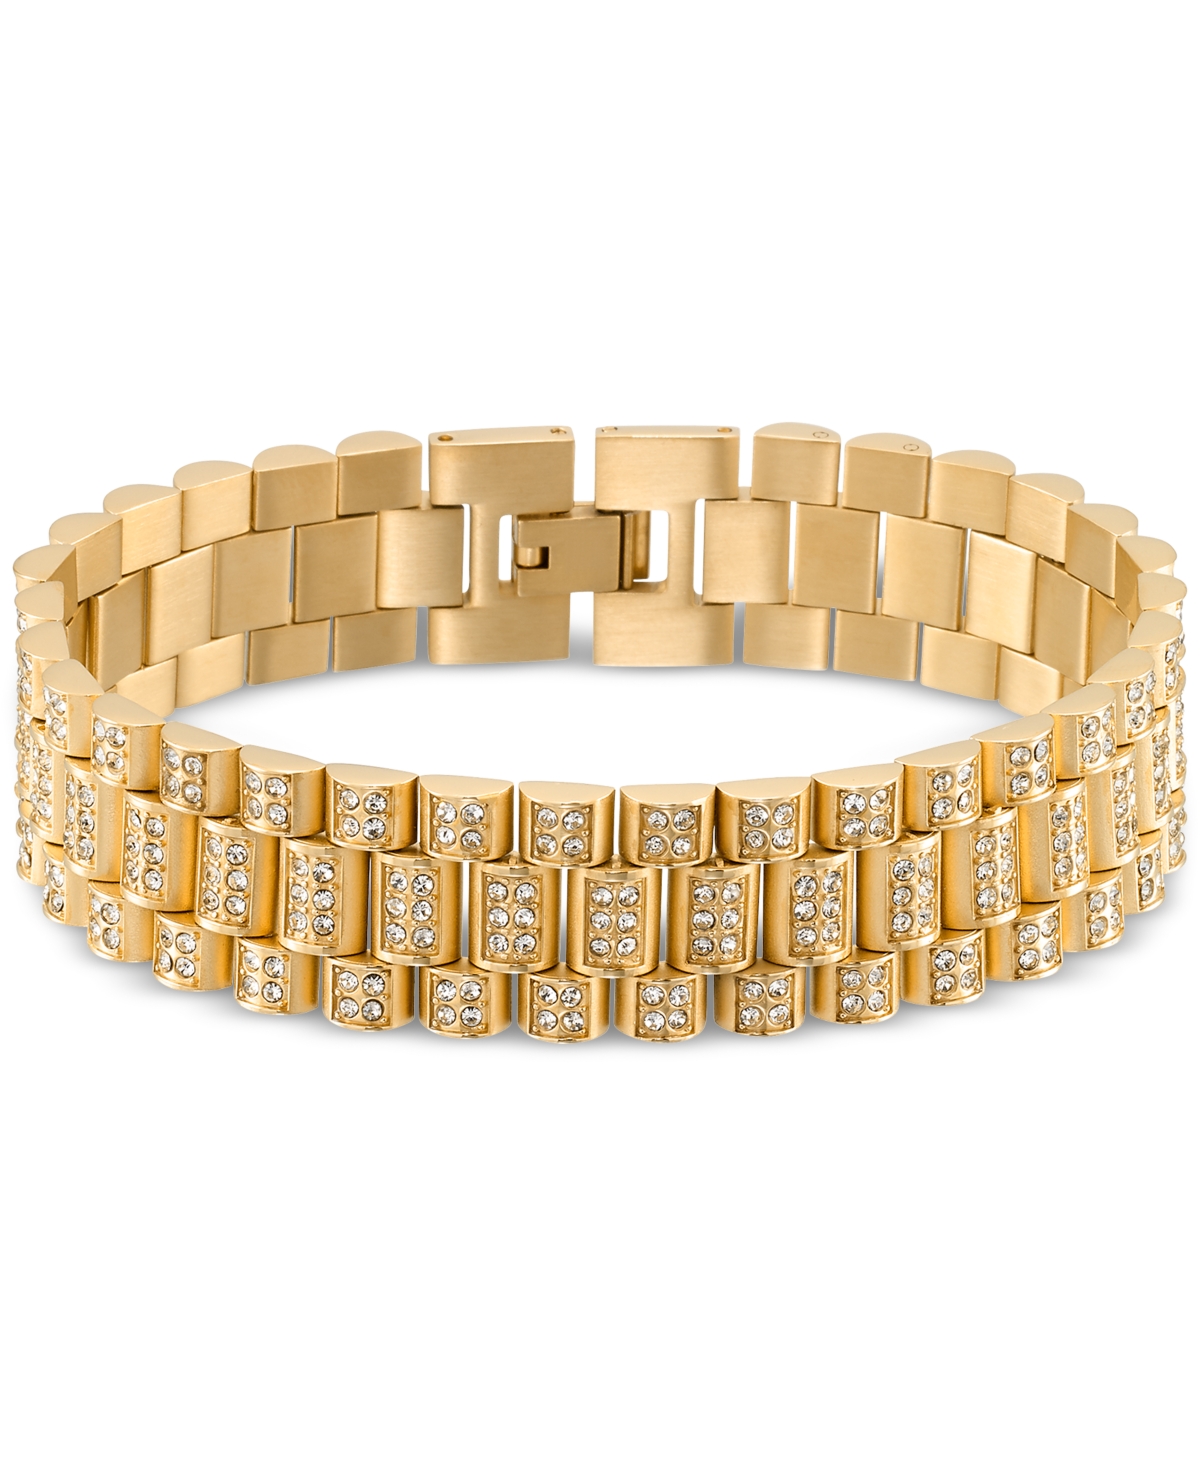 Smith Men's Crystal Watch Link Bracelet in Gold-Tone Ion-Plated Stainless Steel - Gold-Tone